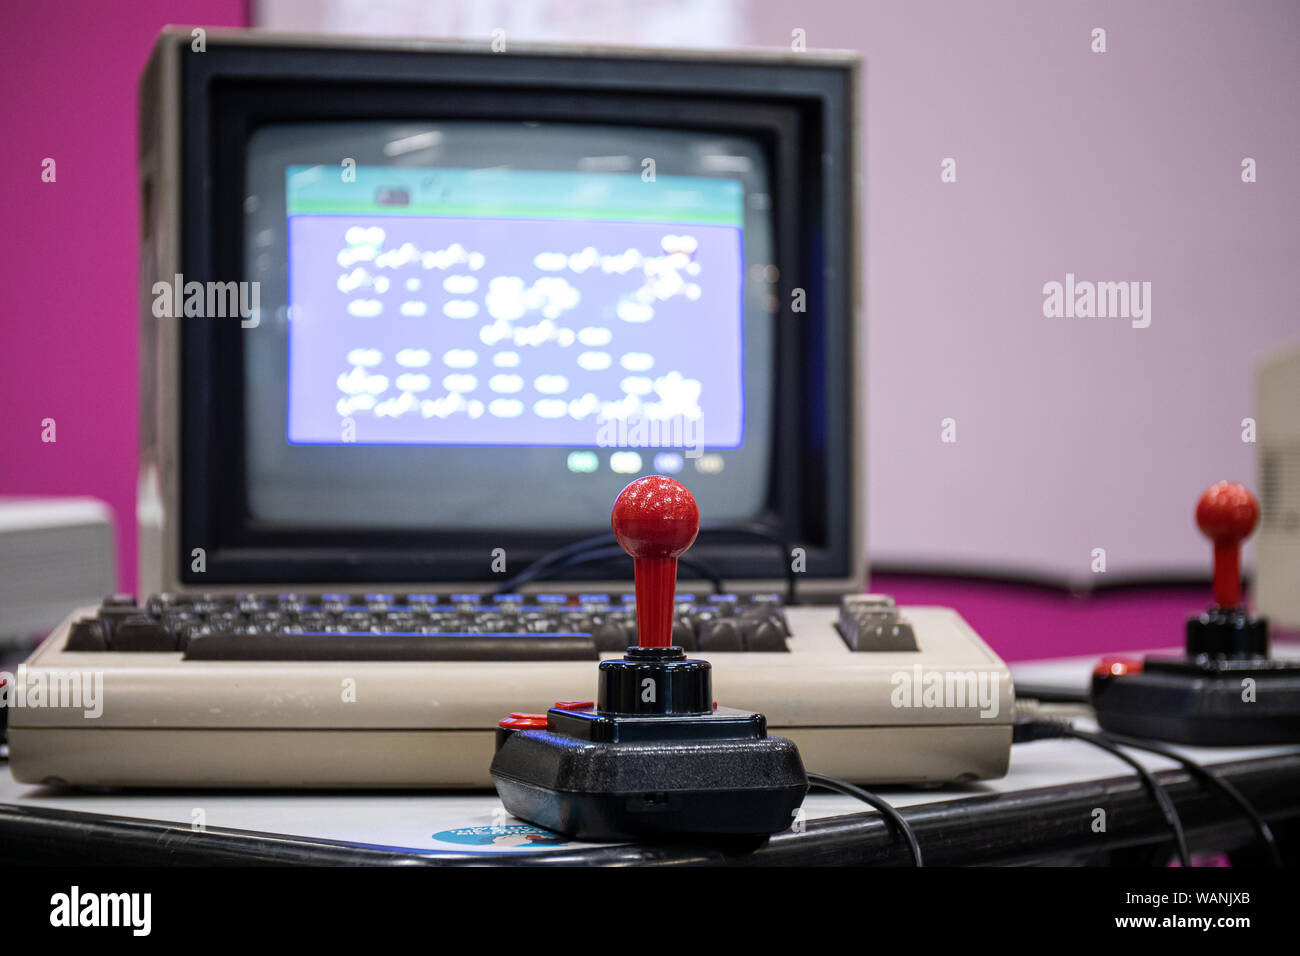 Cologne, Germany. 20th Aug, 2019. Gamescom 2019: Retro gaming area. Gamescom is the world's largest trade fair for computer and video games, at Koelnmesse in Cologne, Germany, from 20th to 24th August 2019. Photocredit: Christian Lademann Stock Photo